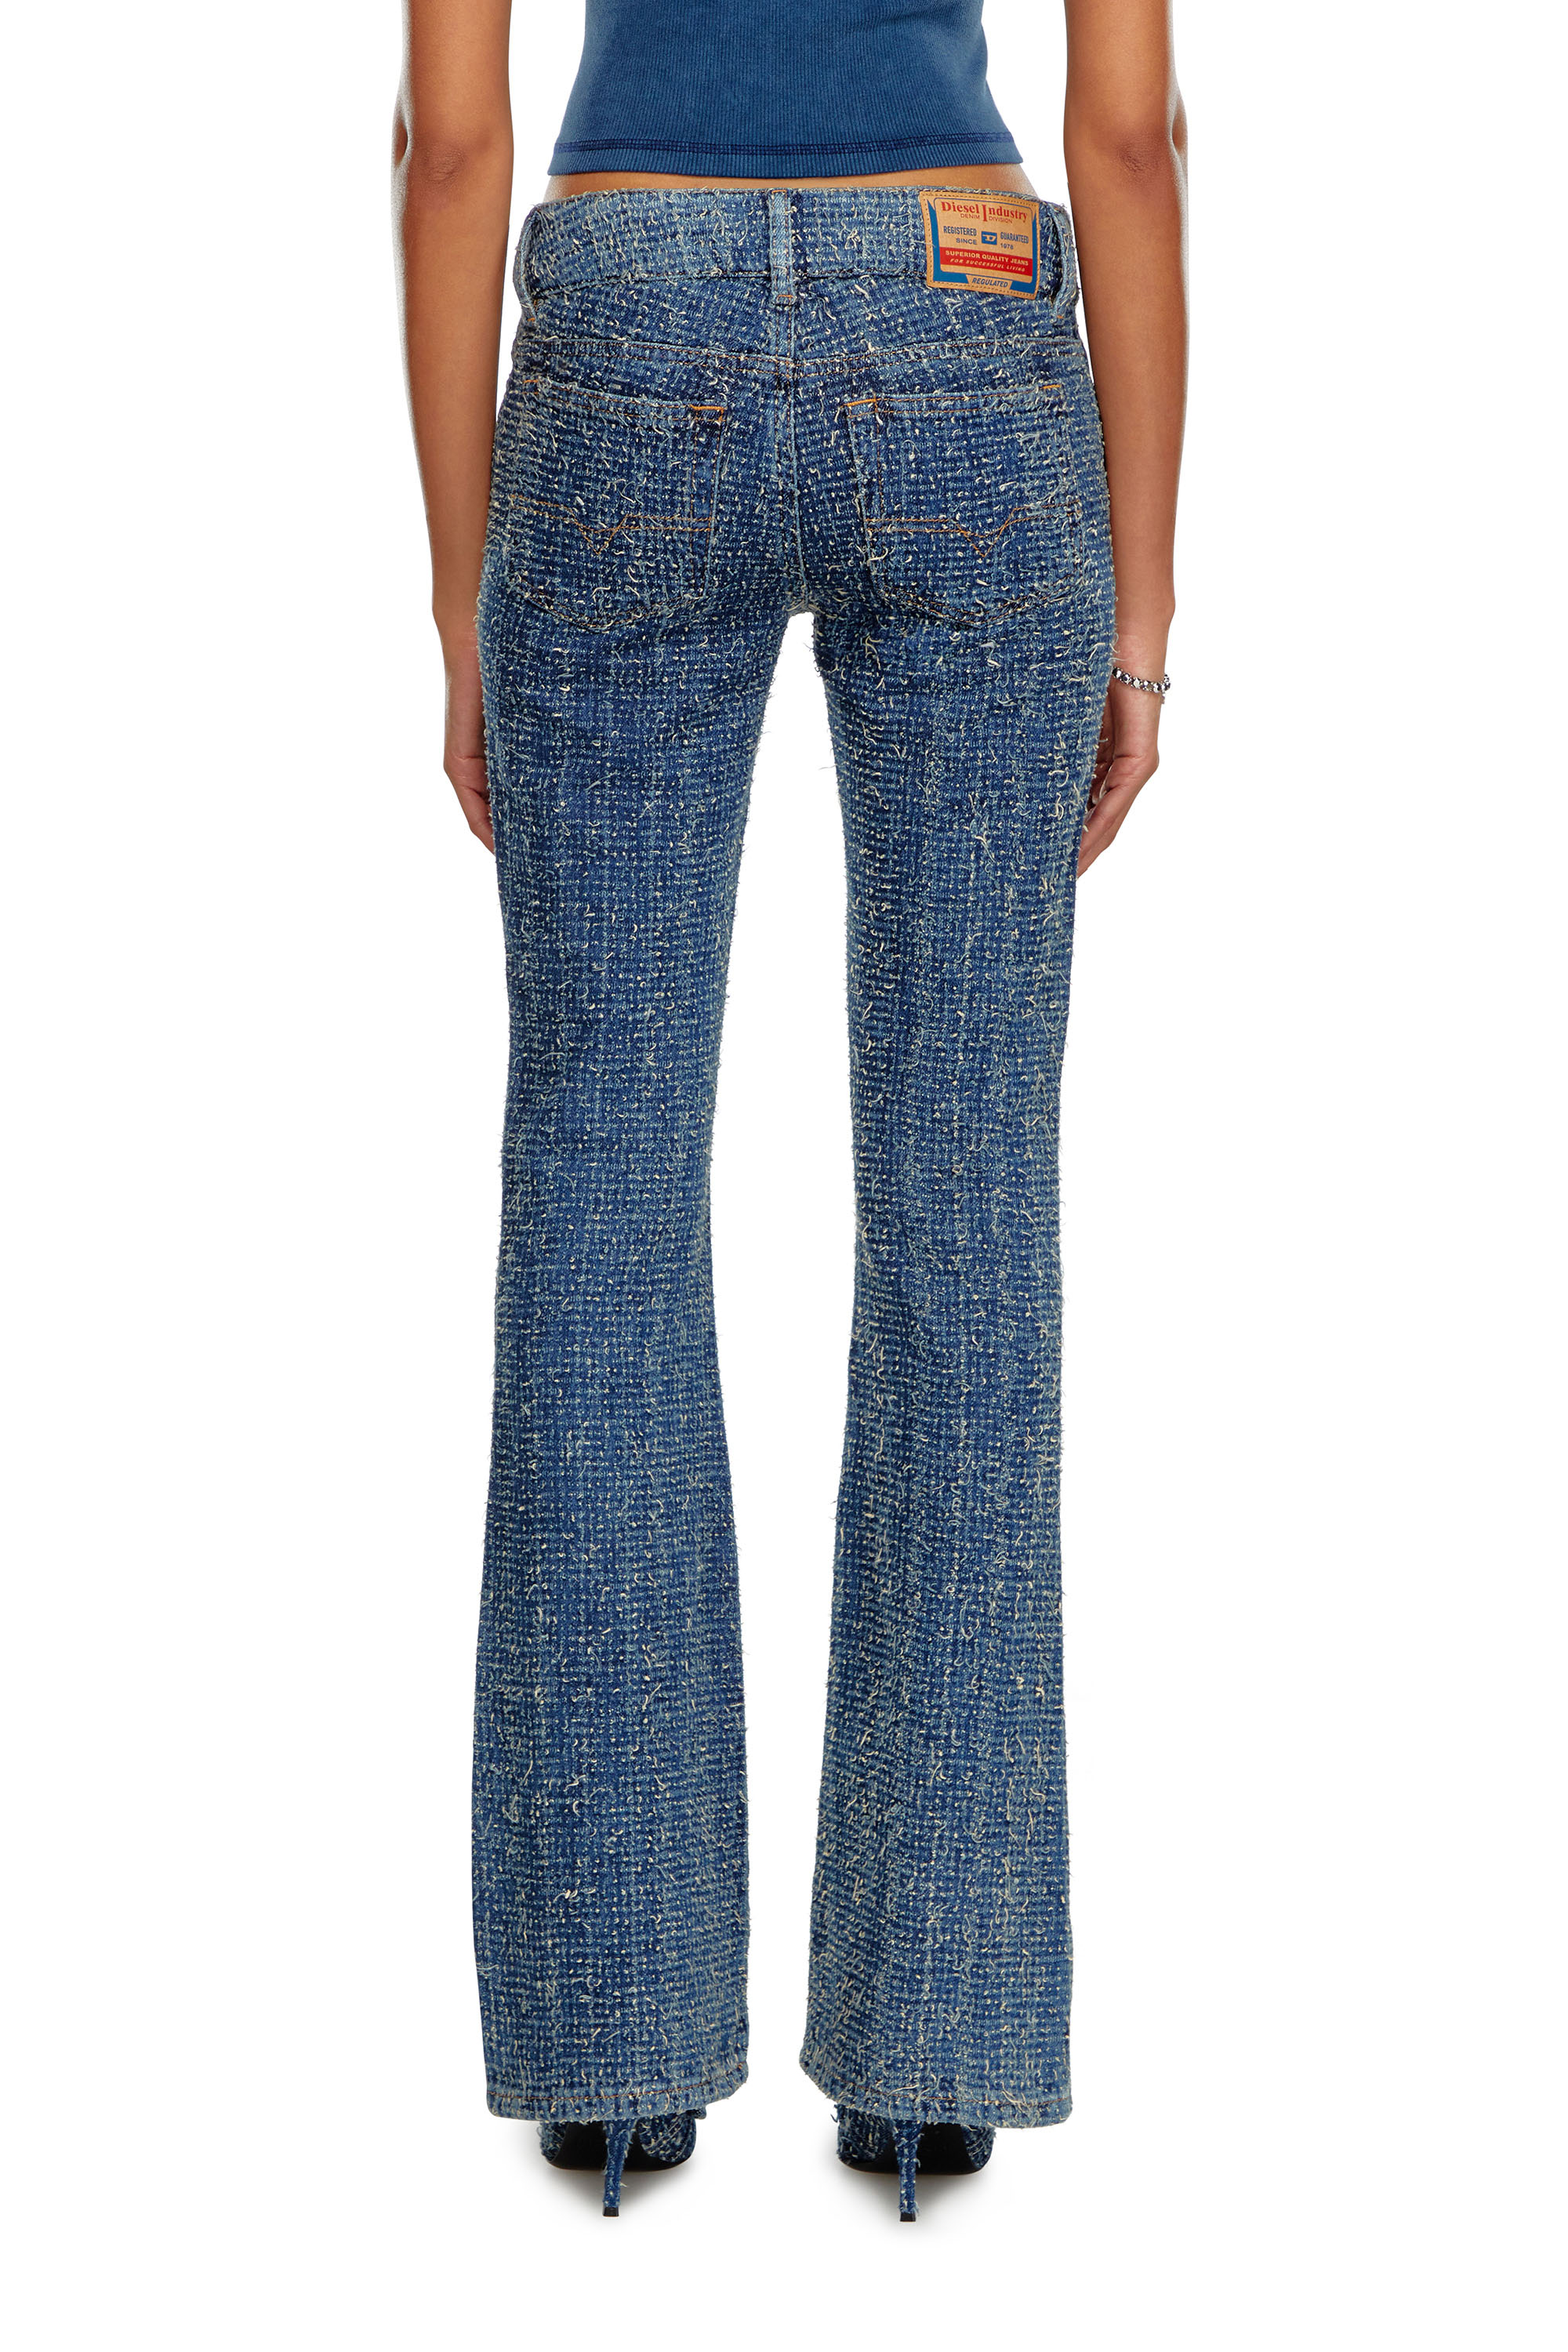 Diesel - Bootcut and Flare Jeans D-Ebush 0PGAH, Mujer Bootcut y Flare Jeans - D-Ebush in Azul marino - Image 3